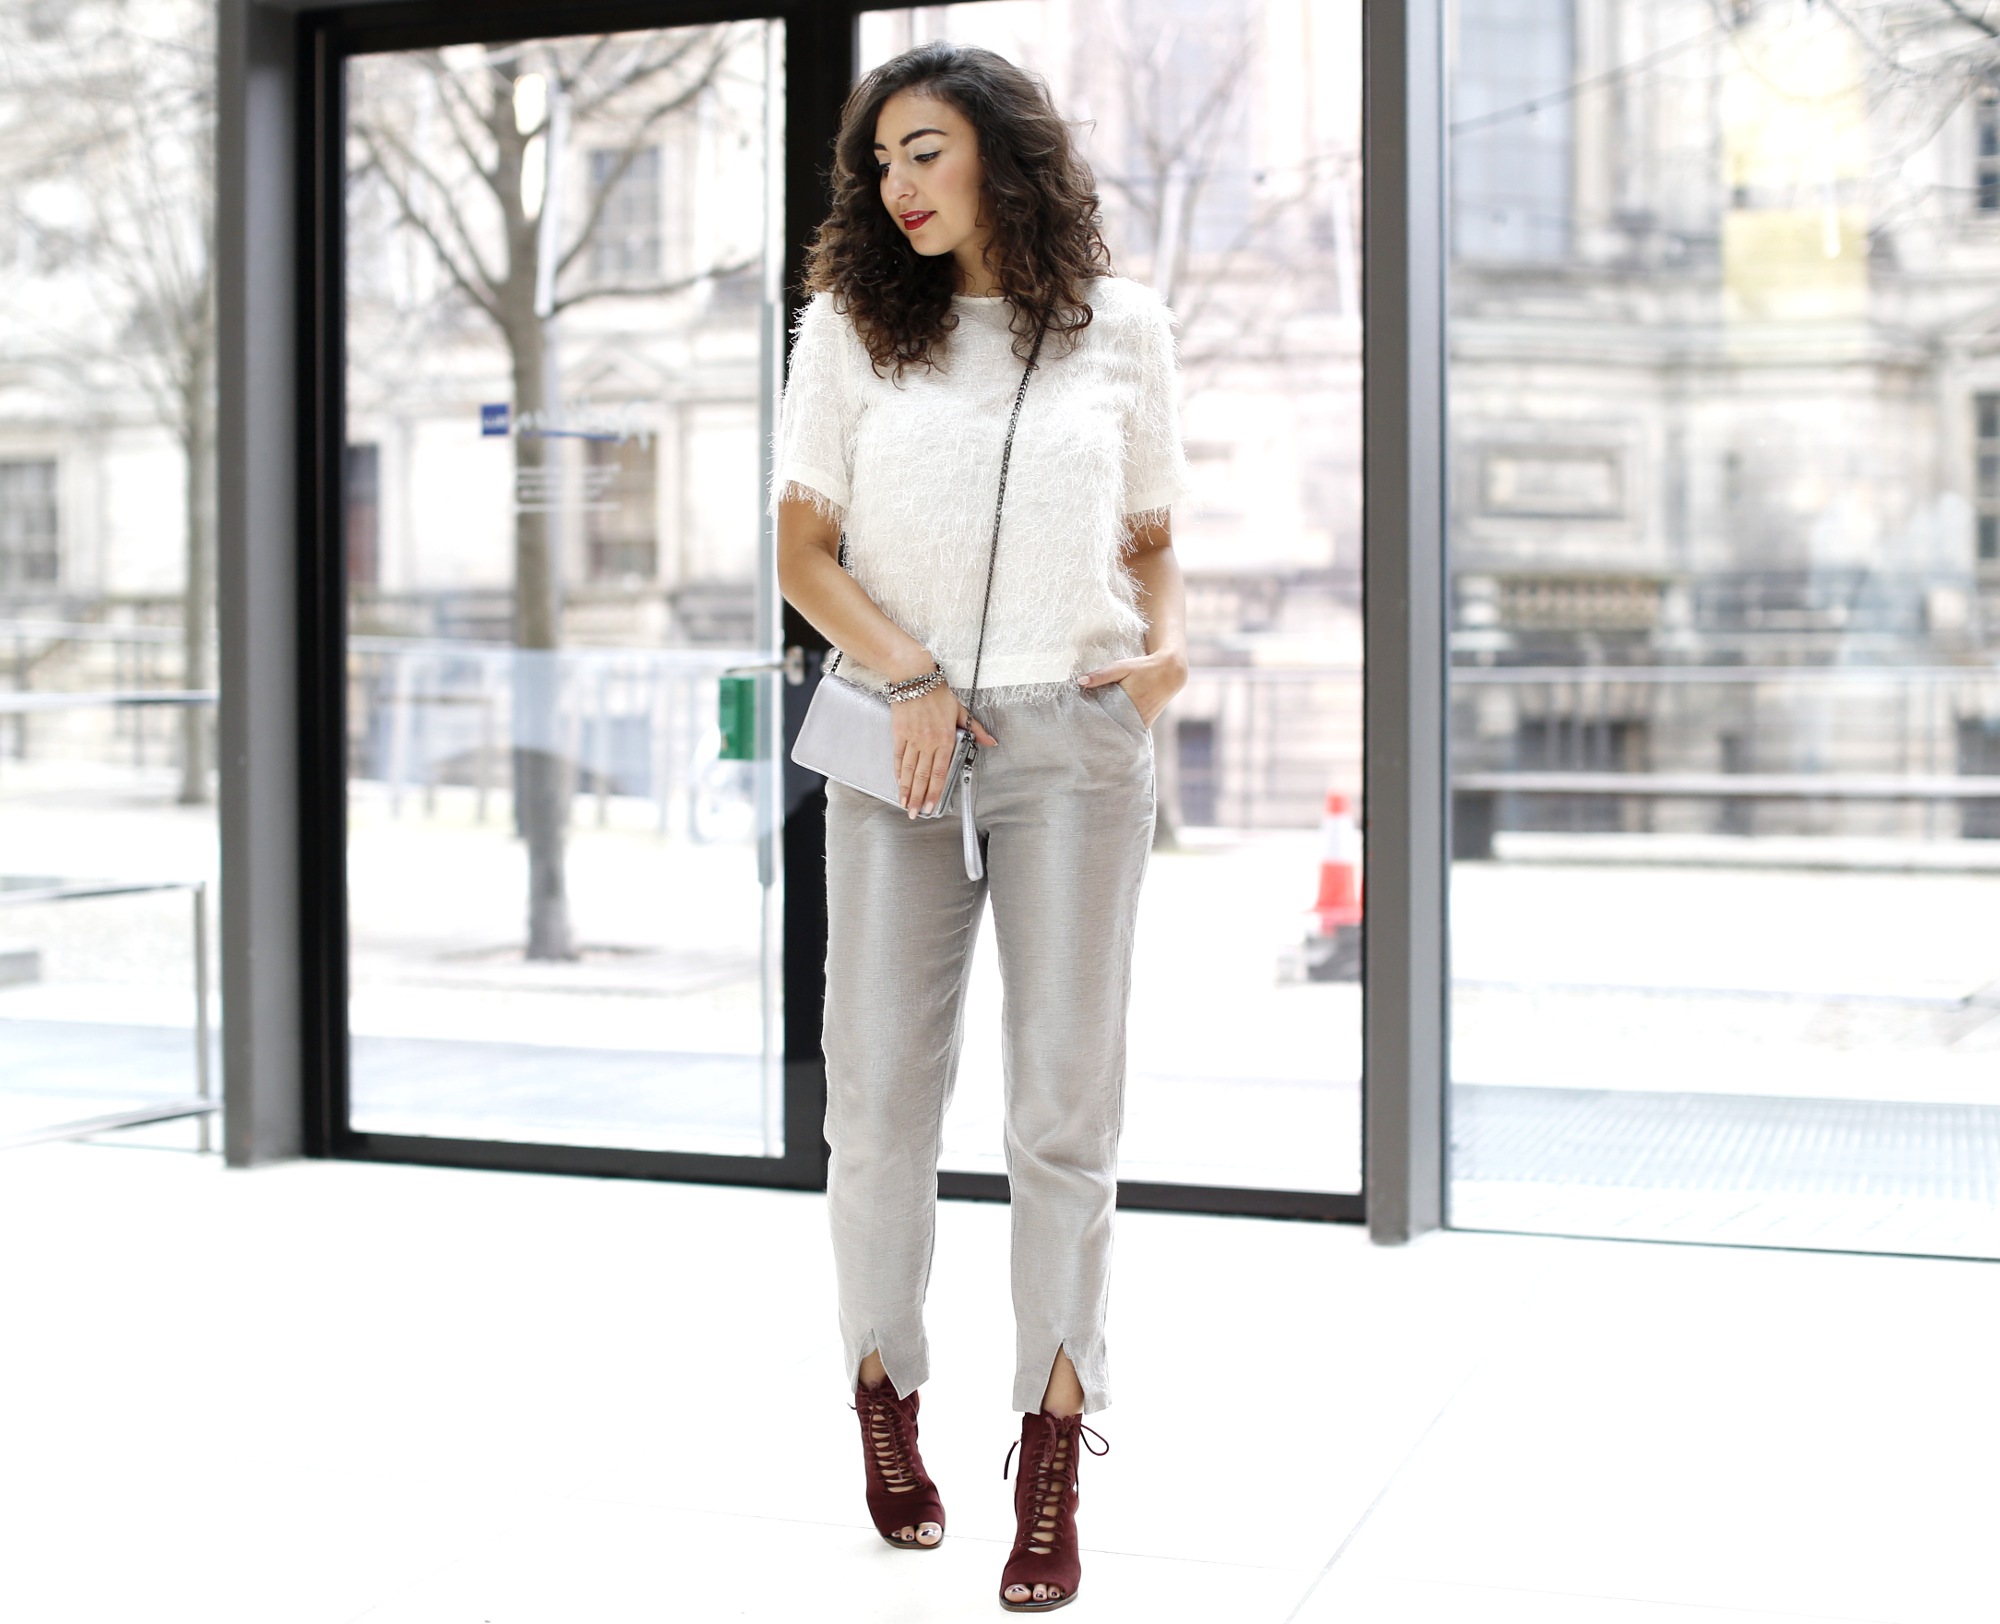 Dinner Outfit New Years Eve silver pants white fluffy top zara fashionblog outfit blog samieze inspiration silvester look metallic trousers H&M marc b